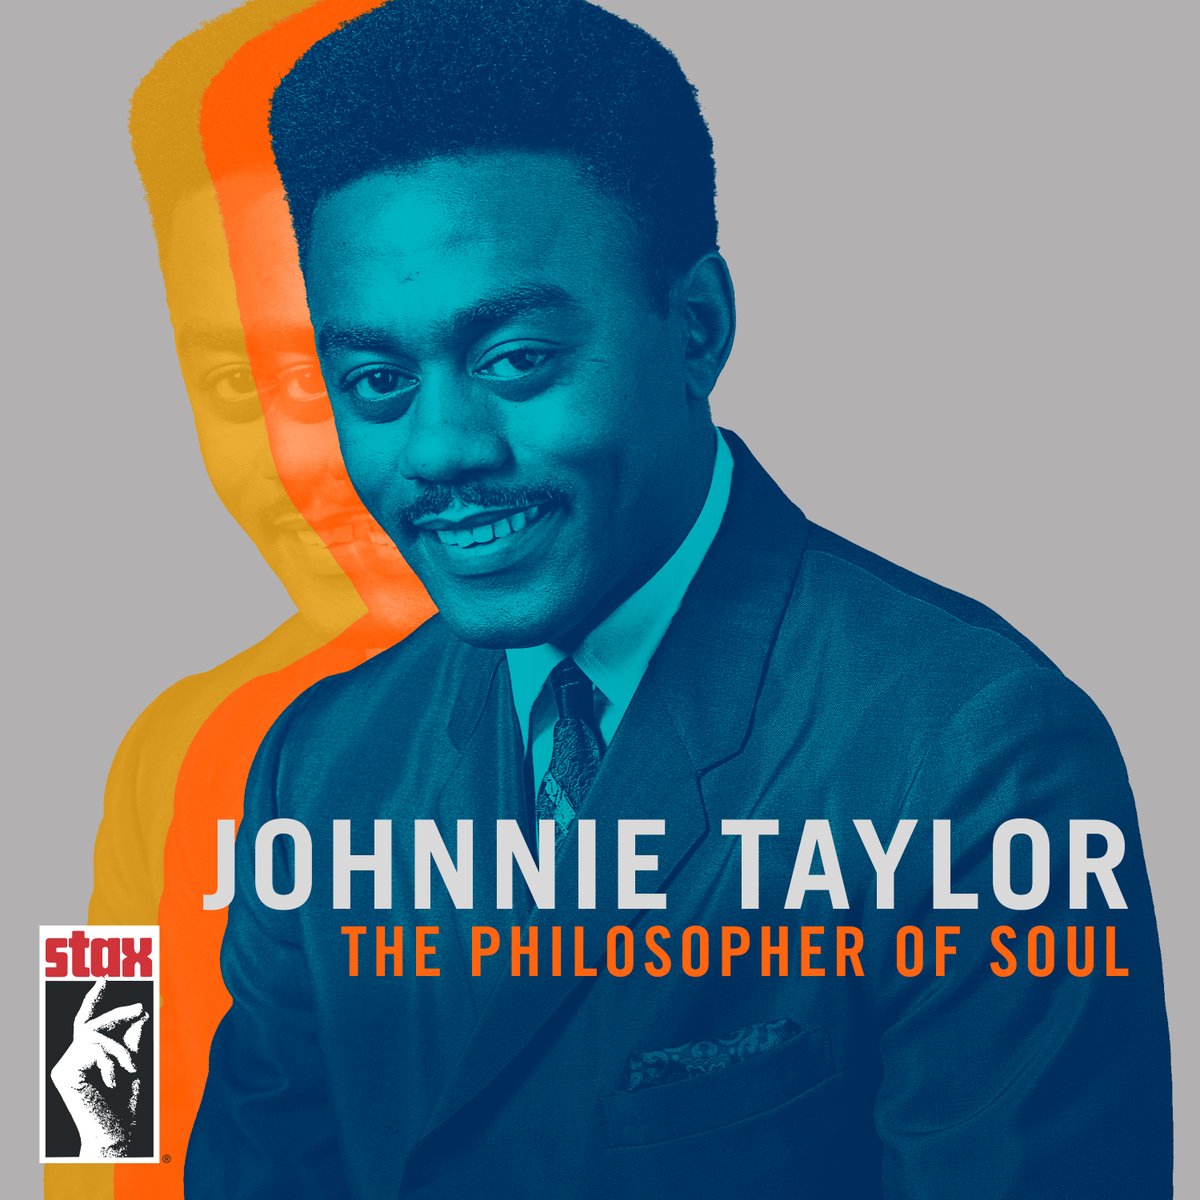 Celebrating the one and only #JohnnieTaylor, the 'Philosopher of Soul' — Listen to some of his most iconic #StaxRecords tracks on the new playlist here: found.ee/johnnie-taylor…